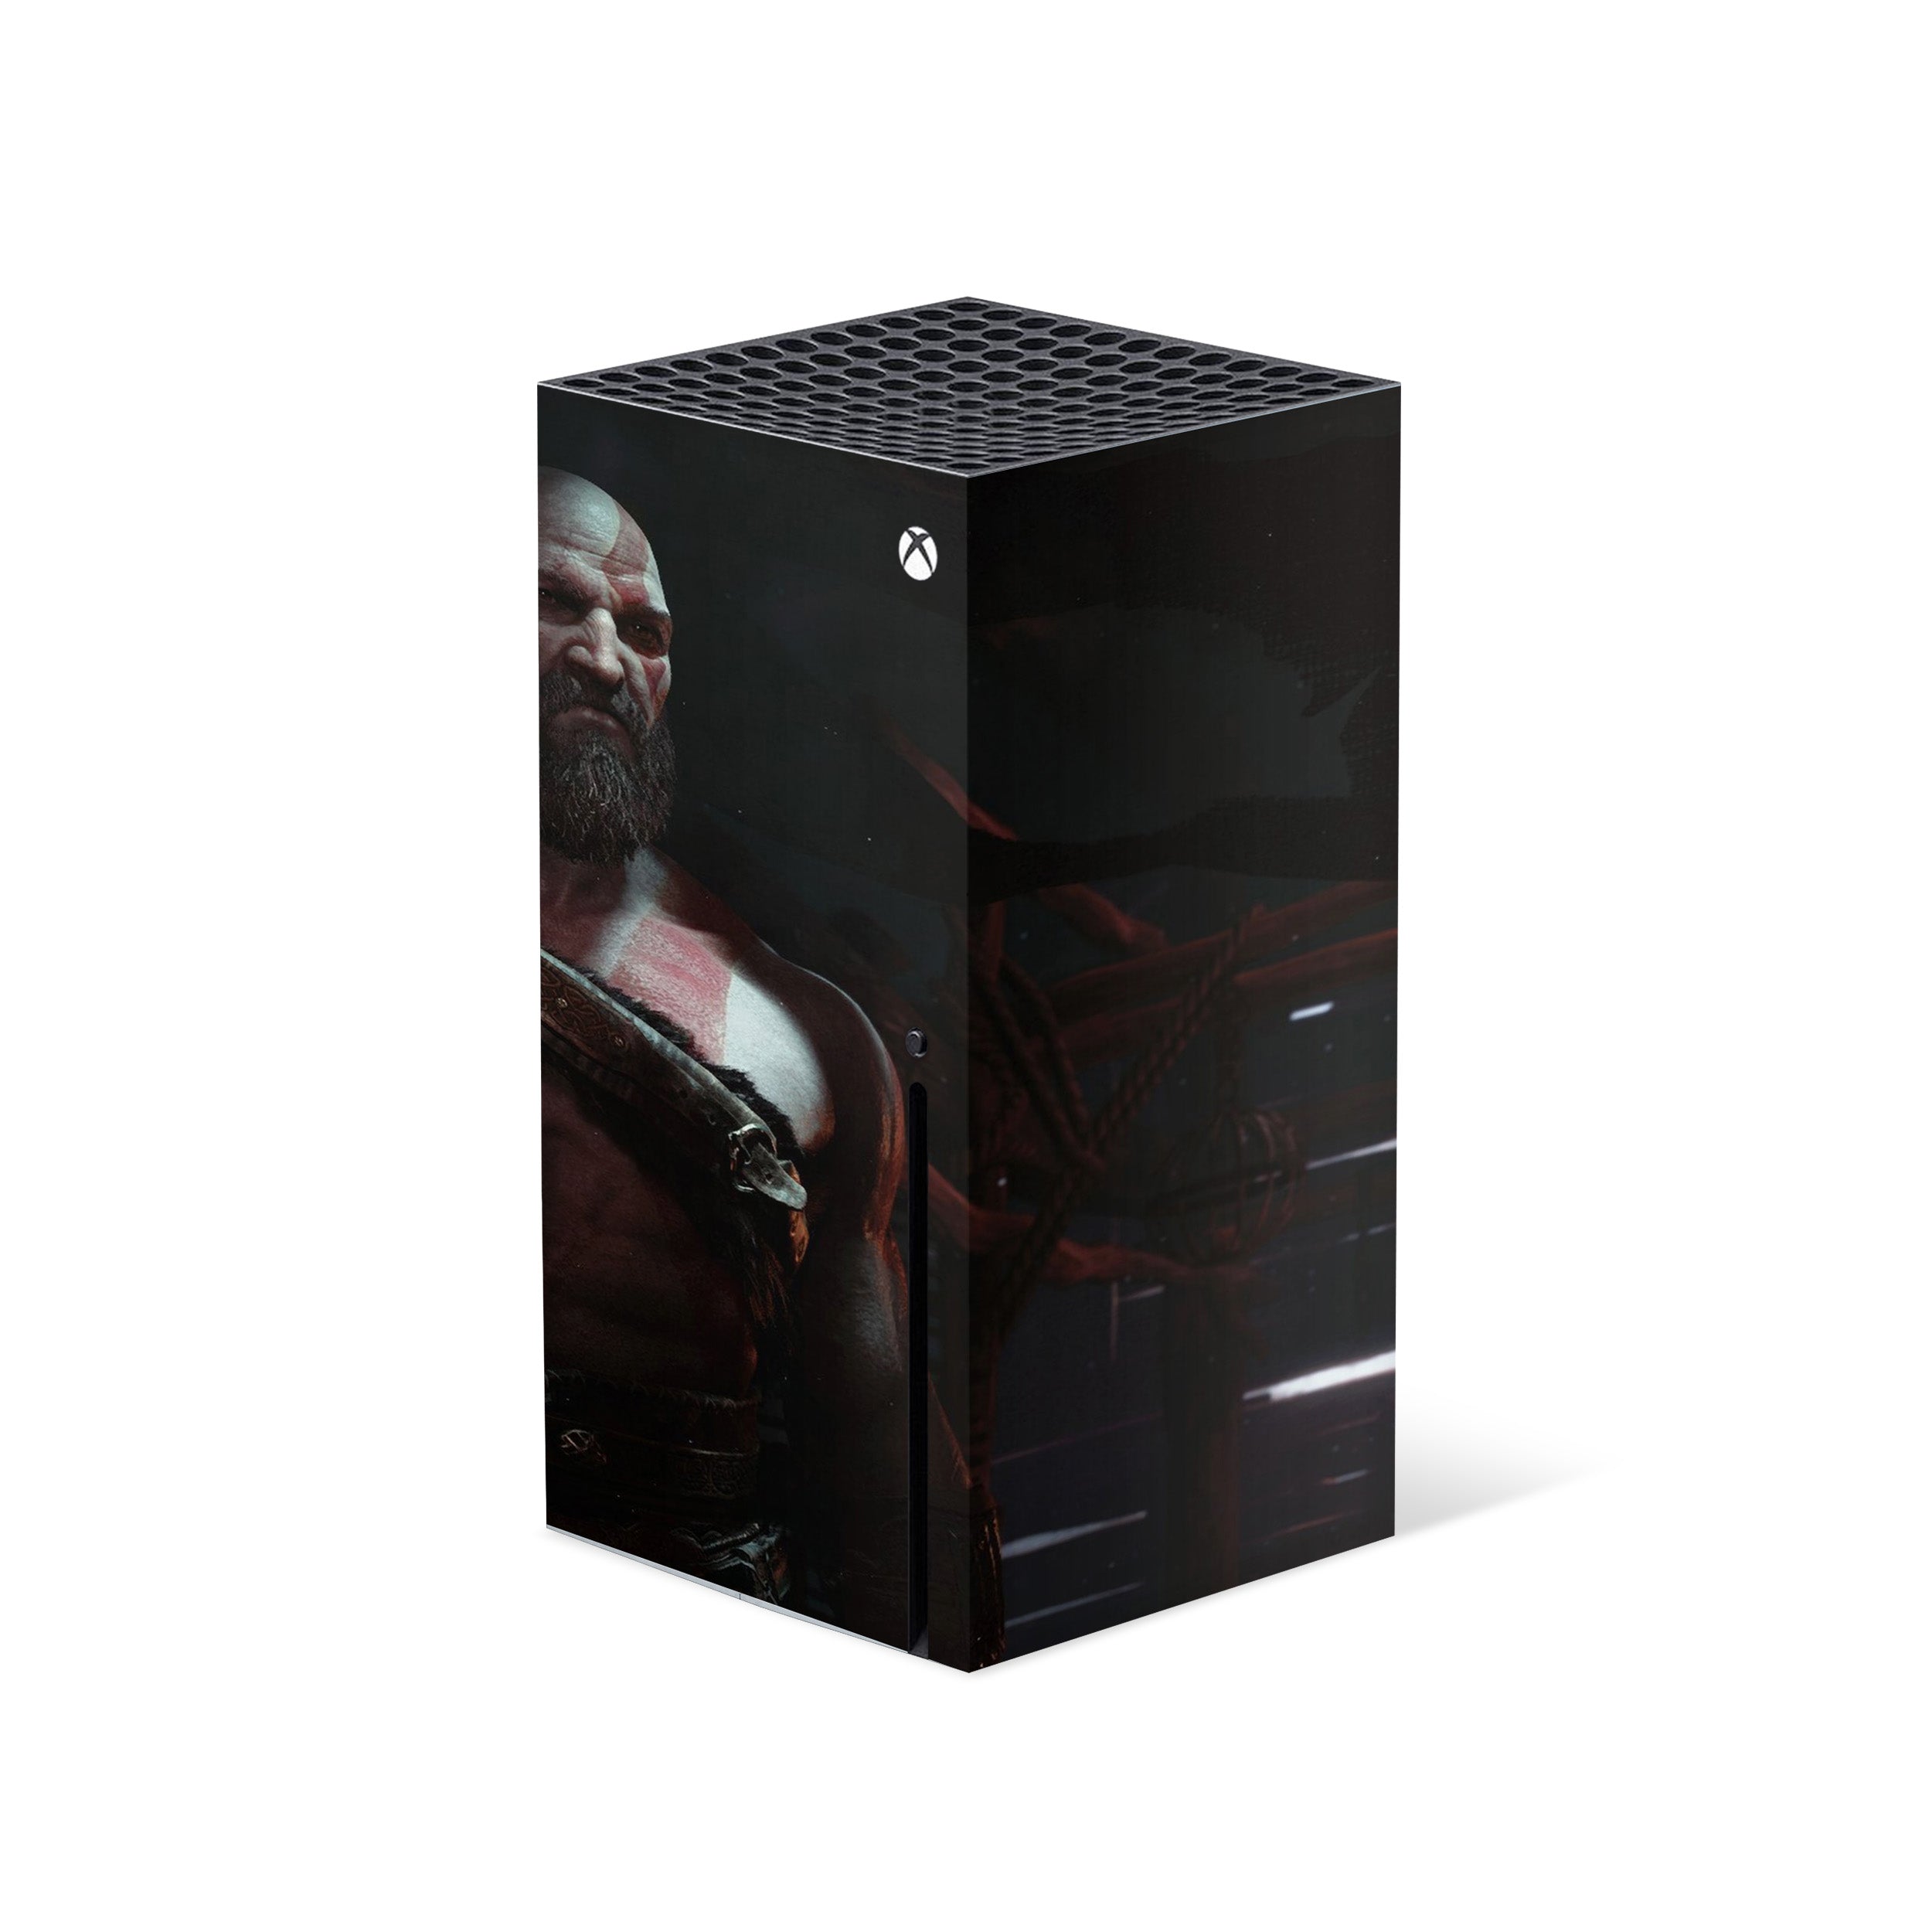 A video game skin featuring a God Of War design for the Xbox Series X.